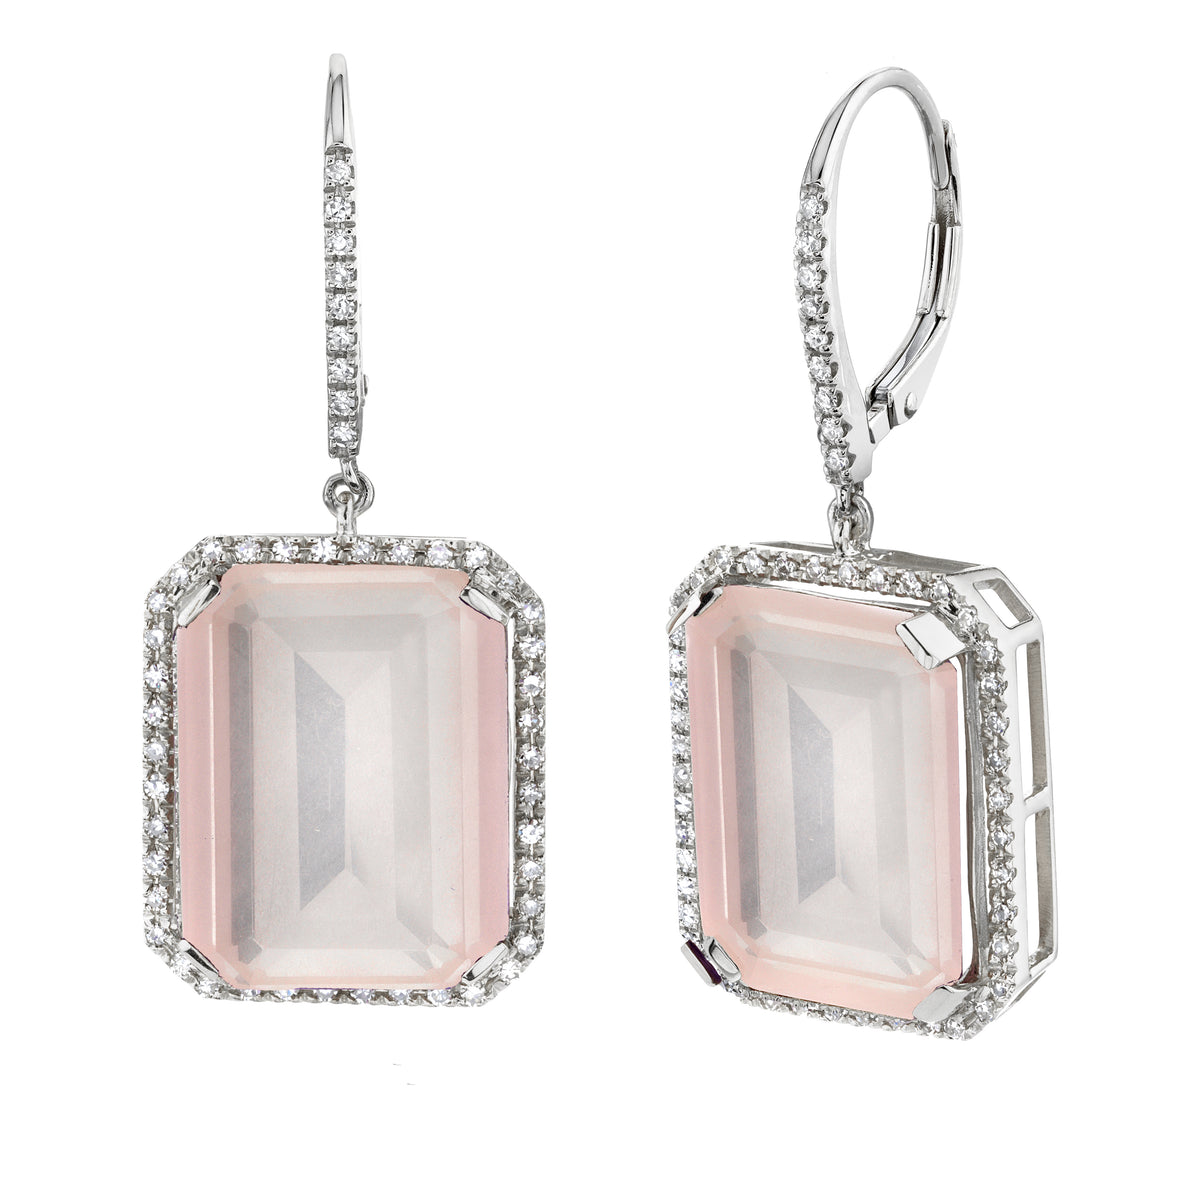 READY TO SHIP LIGHT PINK CRYSTAL PORTRAIT EARRINGS